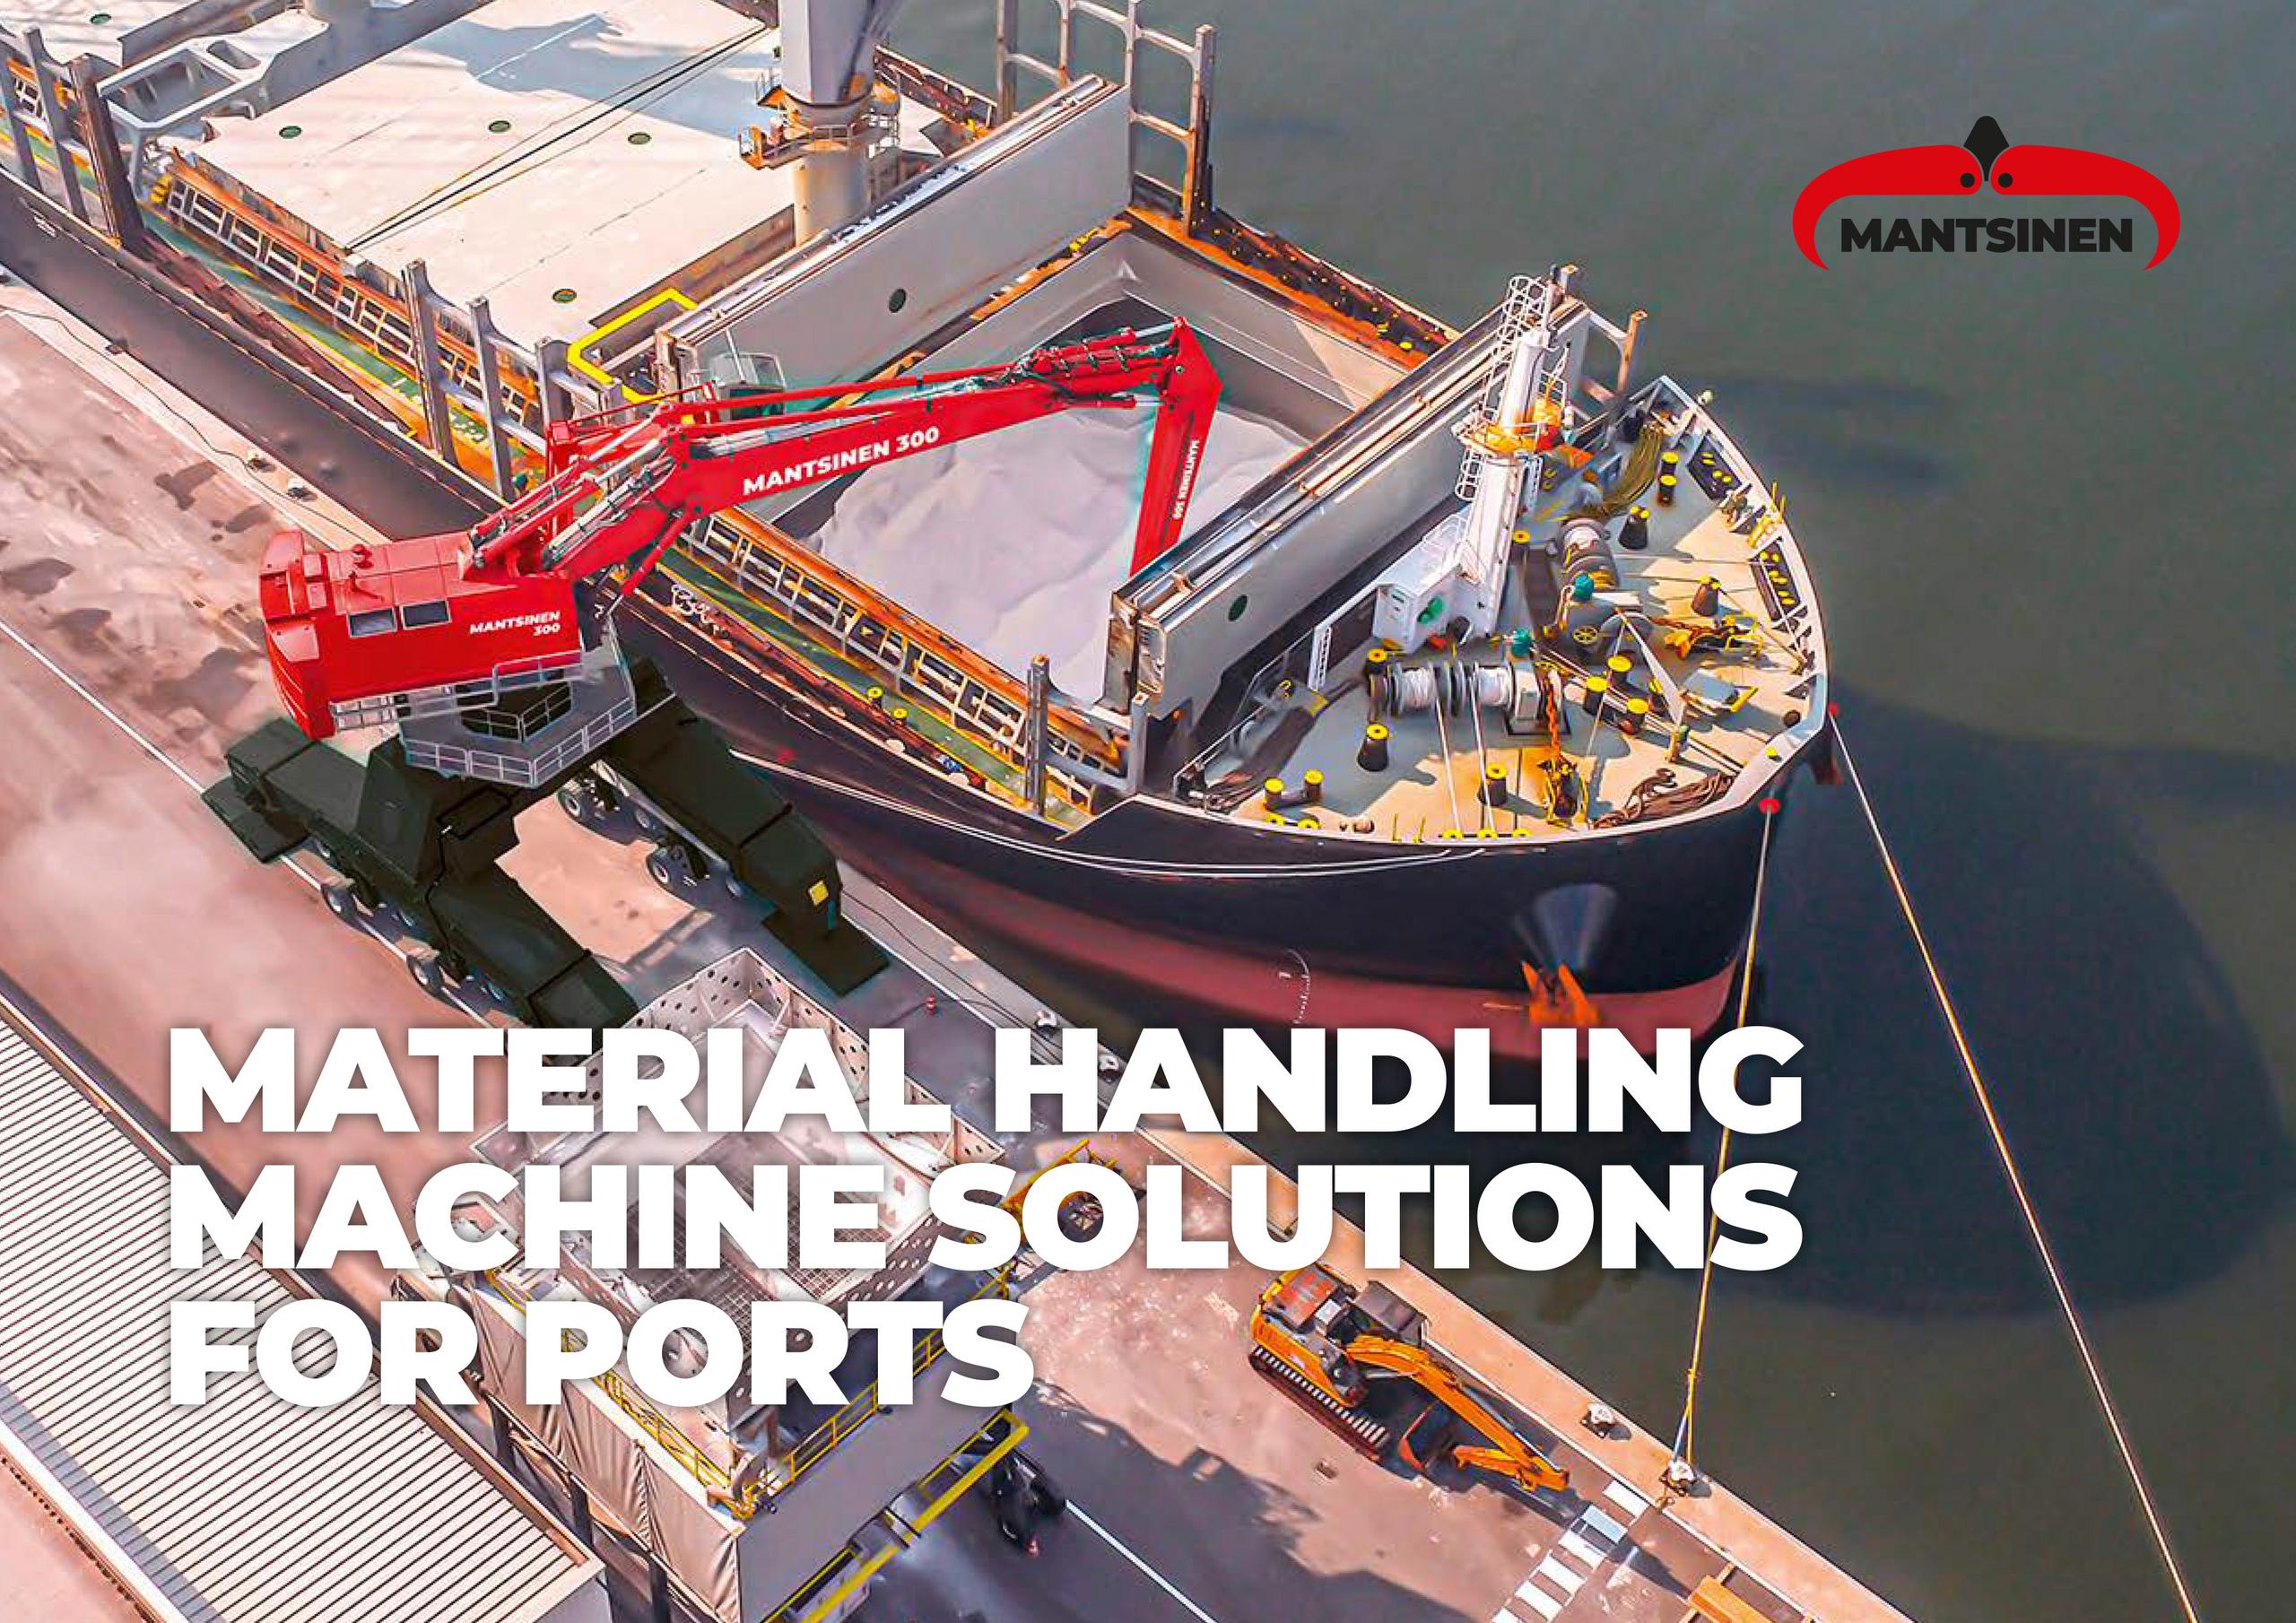 MATERIAL HANDLING SOLUTIONS FOR PORTS